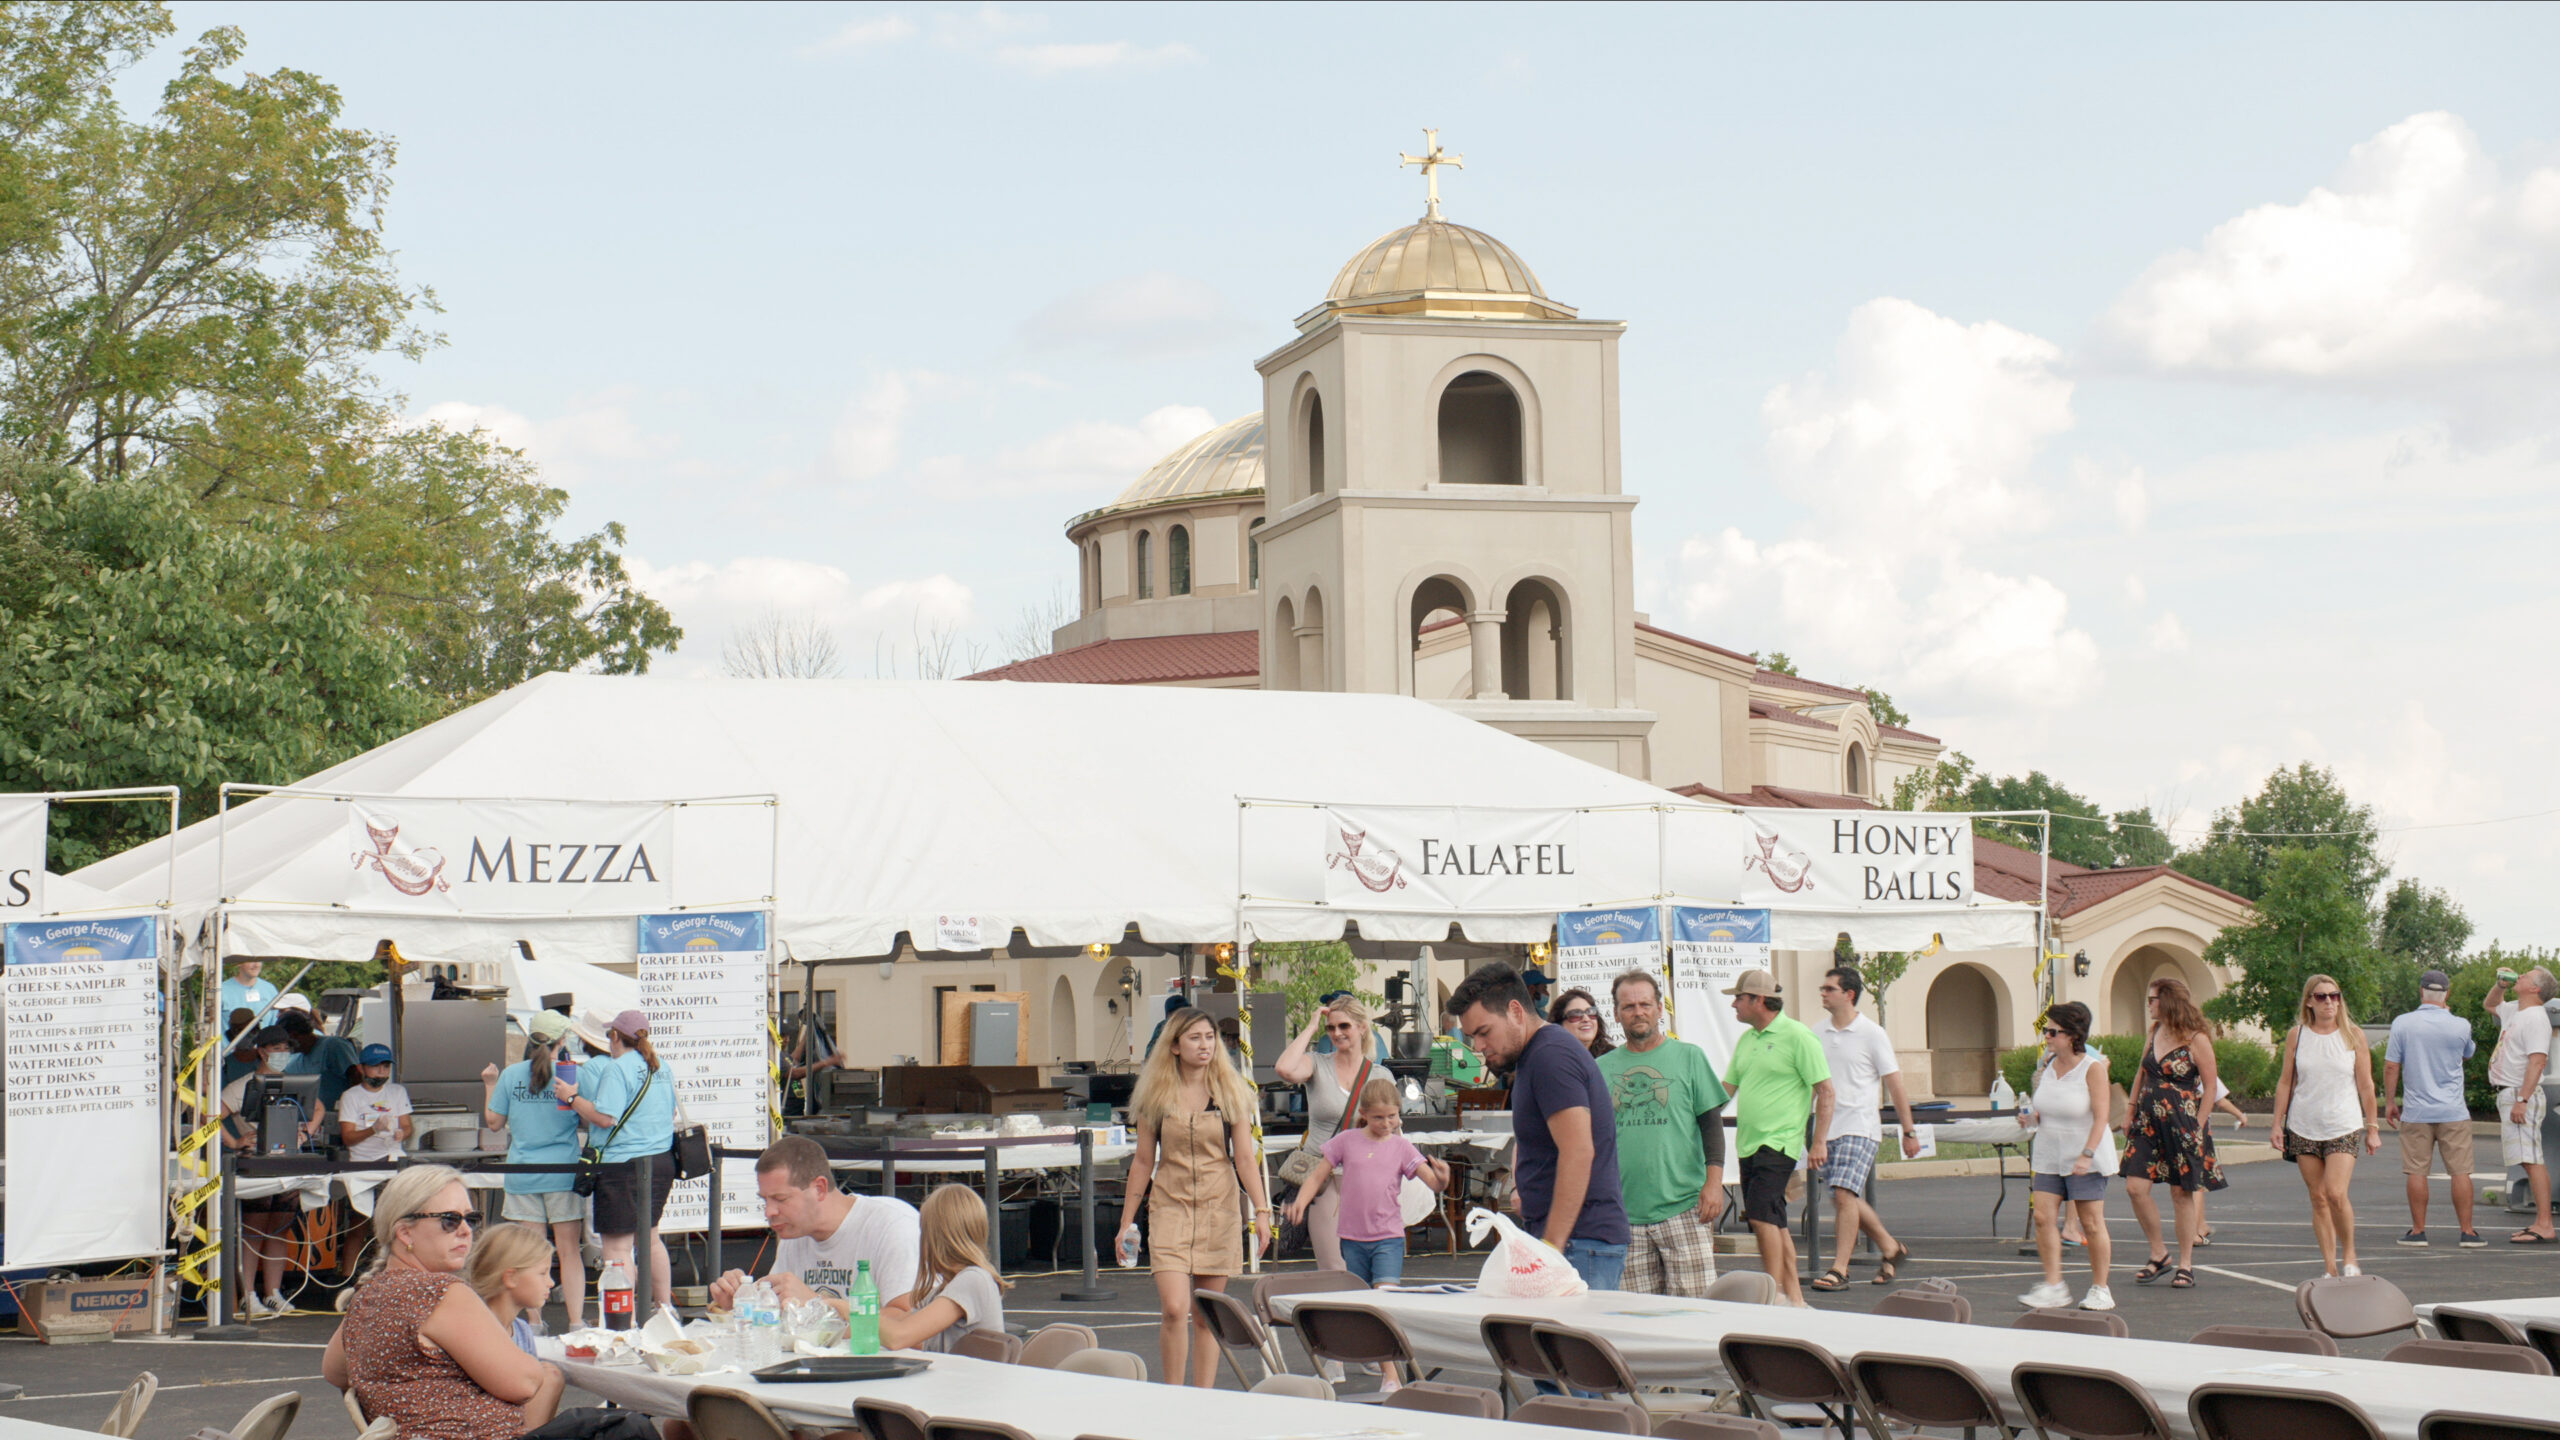 Festival goers stand in a line in front of a white tent and decorative Orthodox Church to get food like mezza, falafel, and honey balls